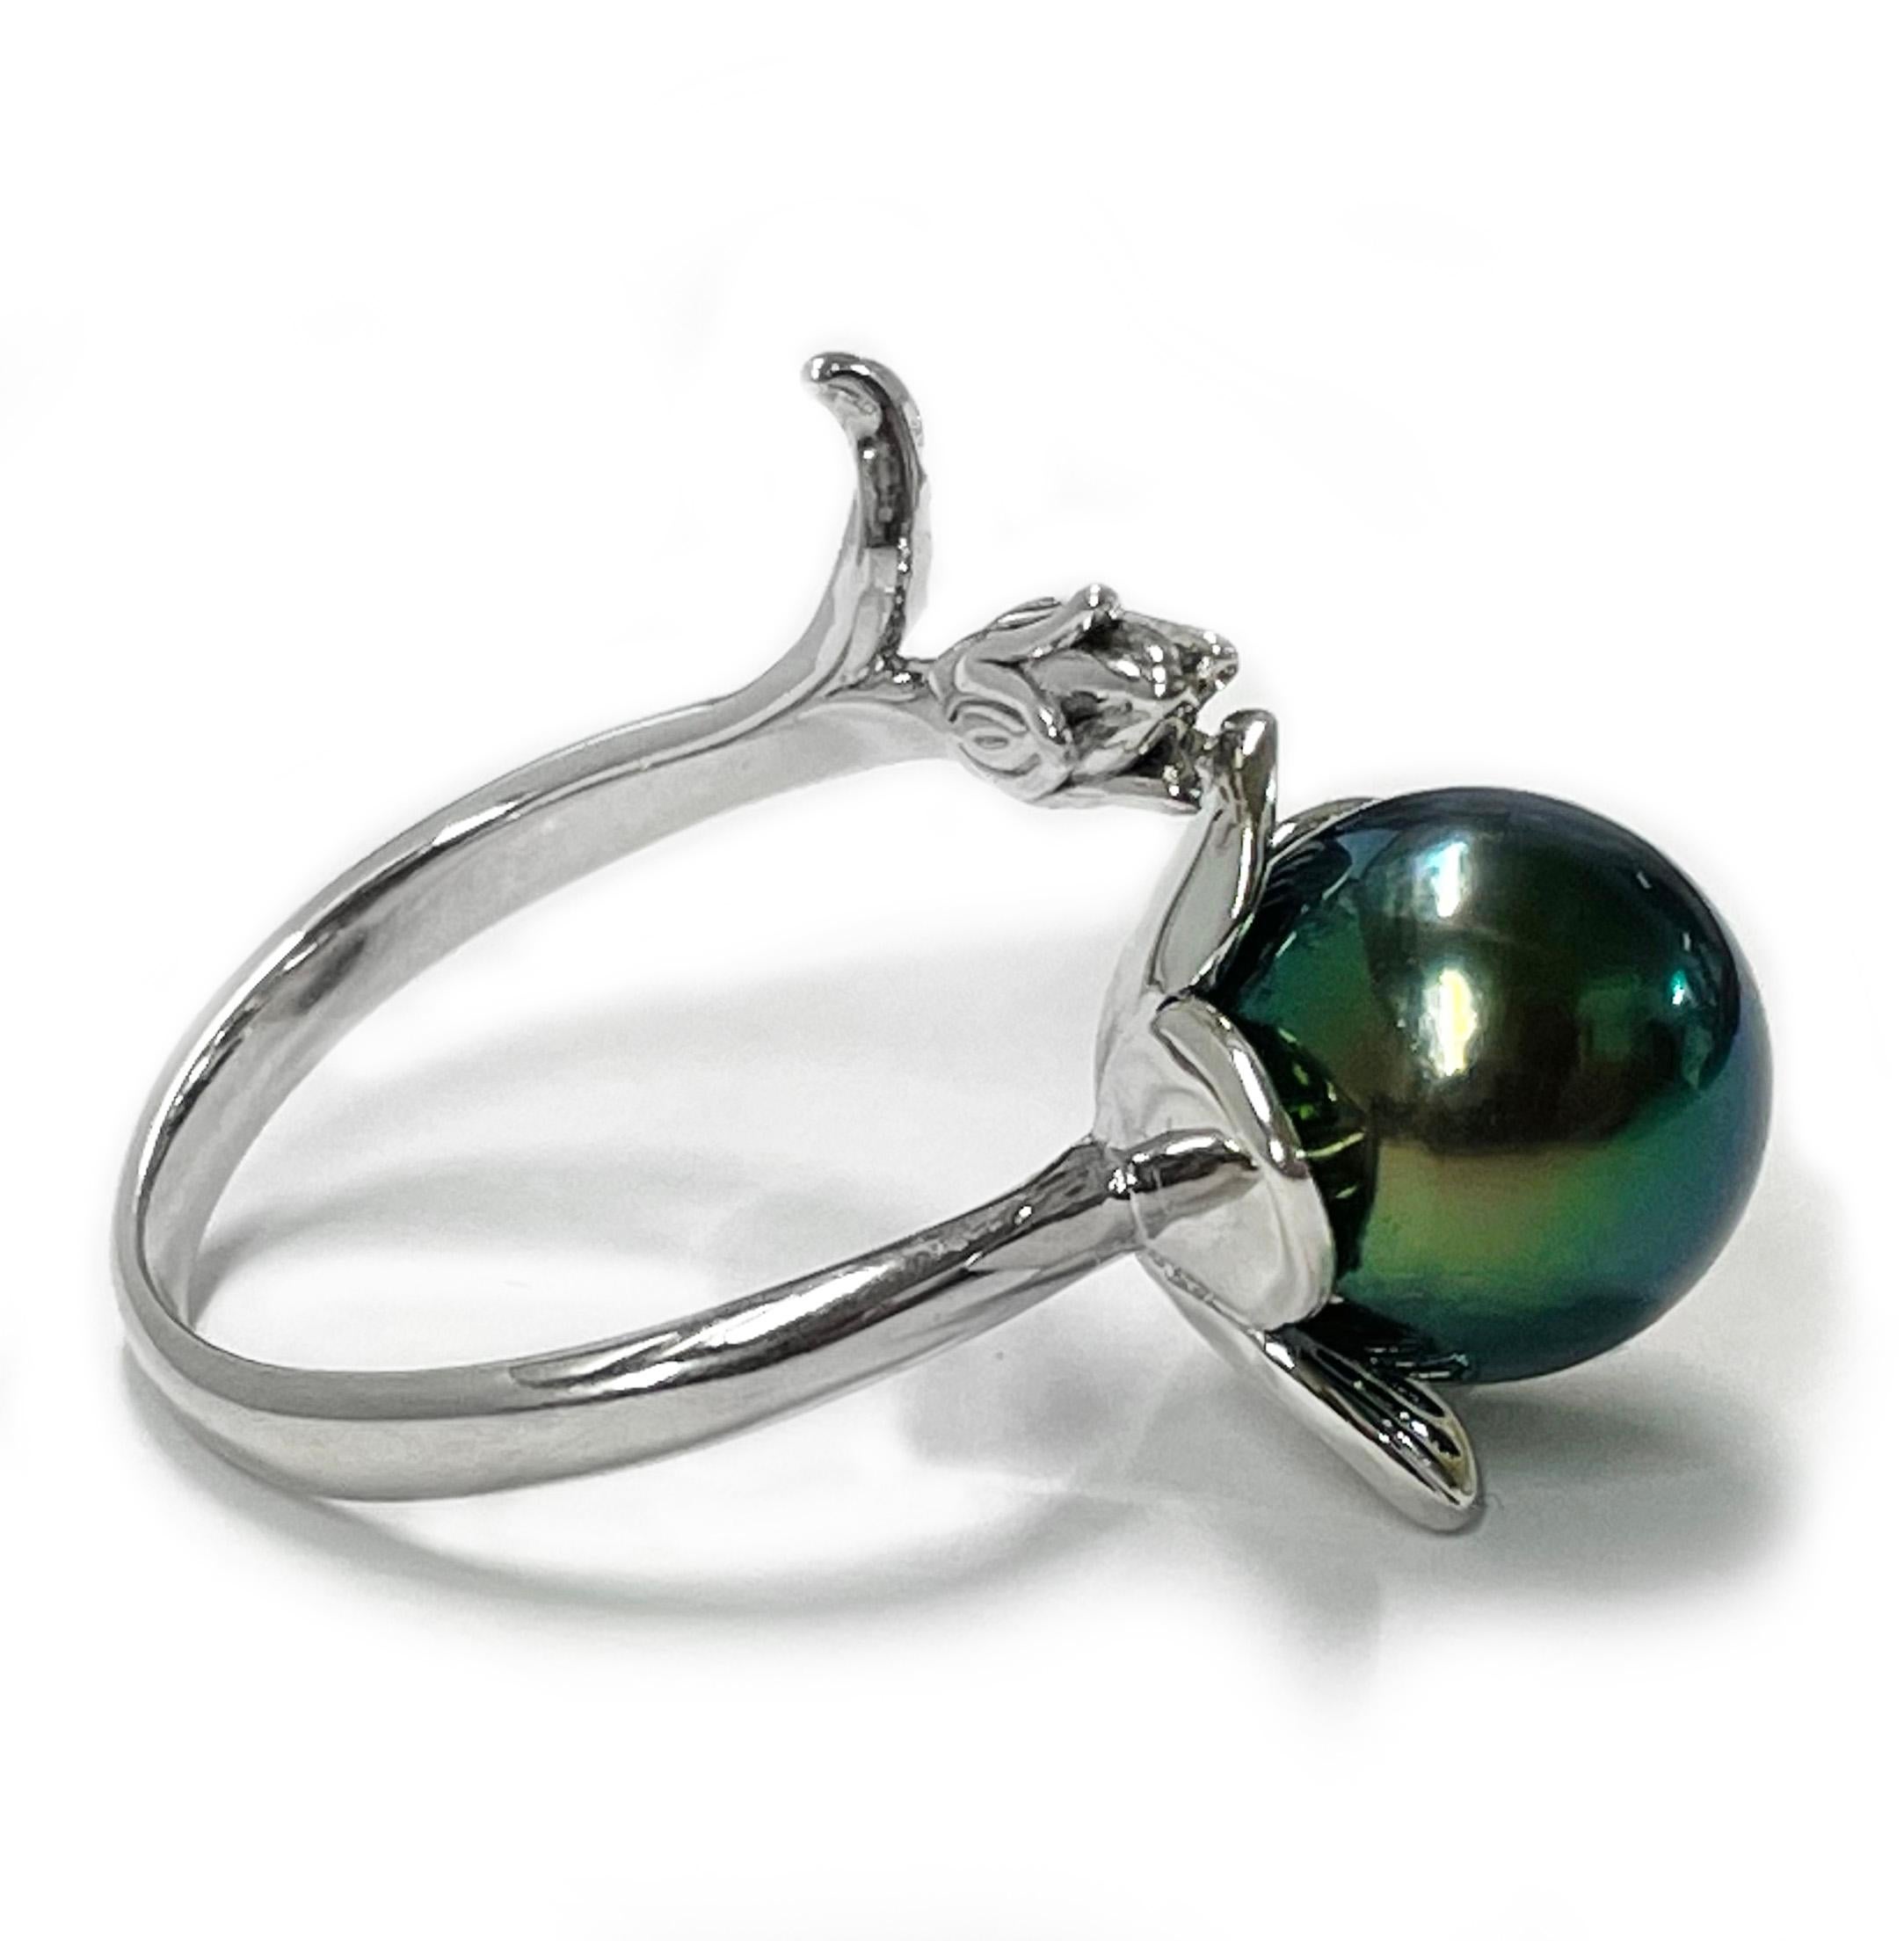 Tahitian Pearl Sterling Silver Ring. The ring features a band that mimics a stem and flower in a bypass design with an absolutely gorgeous green colored Tahitian pearl. The pearl measures 10.5mm and is set on a five petal sterling silver flower. The